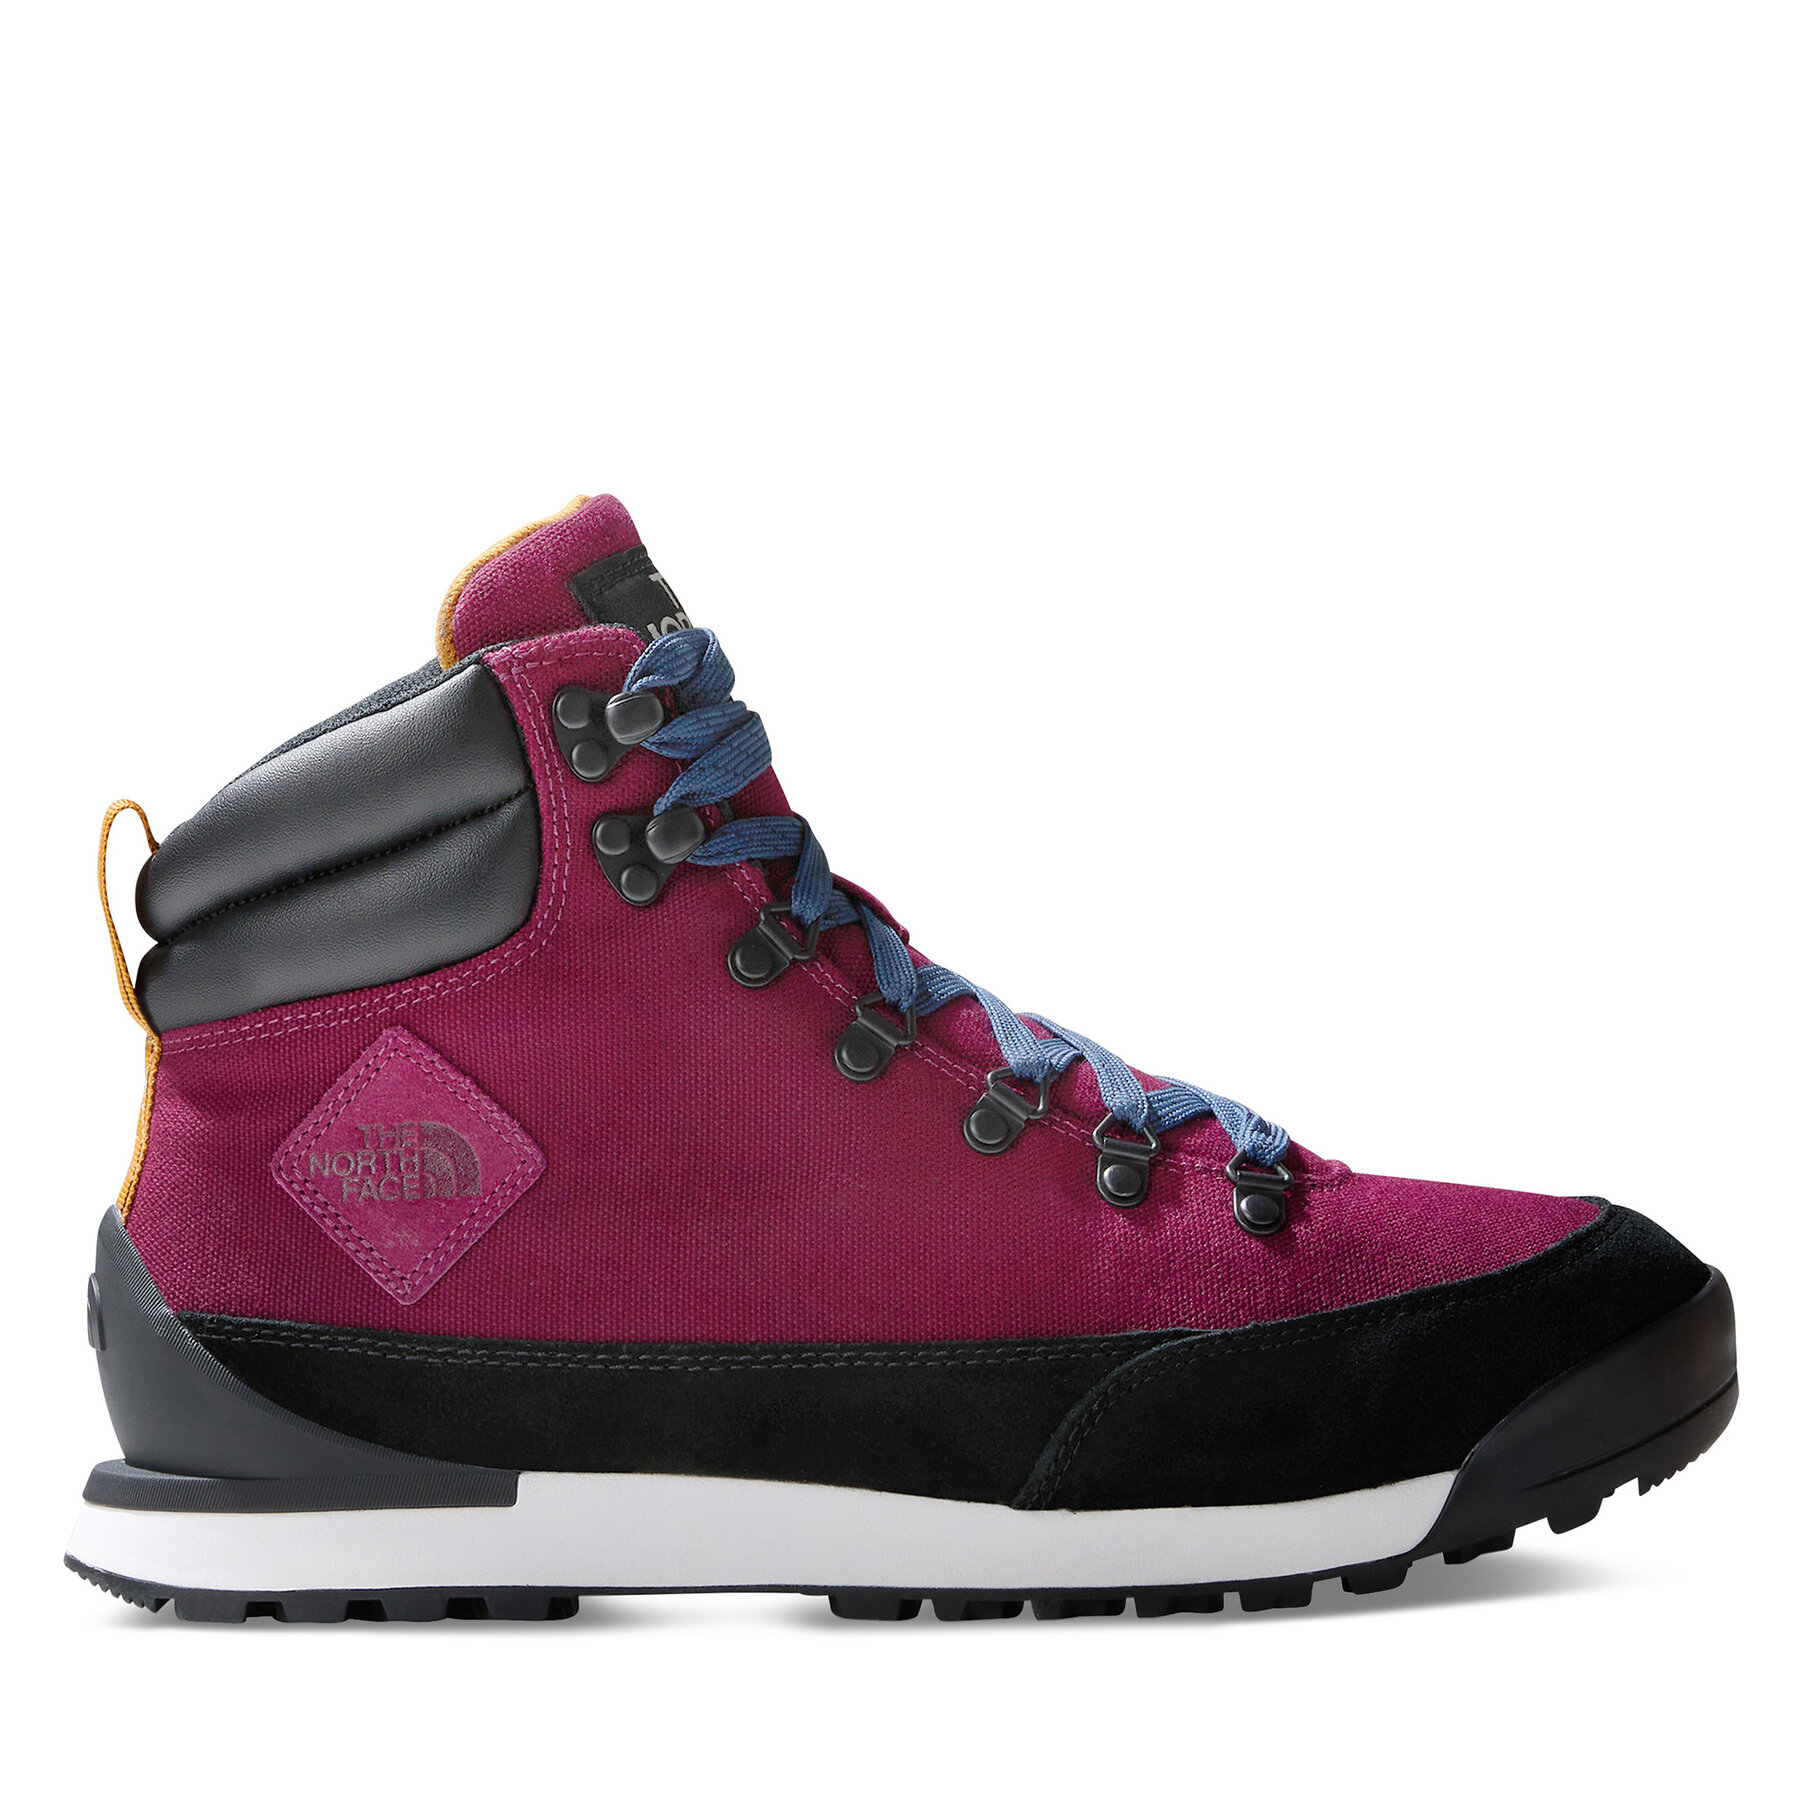 Trekkingschuhe The North Face M Back-To-Berkeley Iv Textile WpNF0A8177KK91 Boysenberry/Tnf Black von The North Face